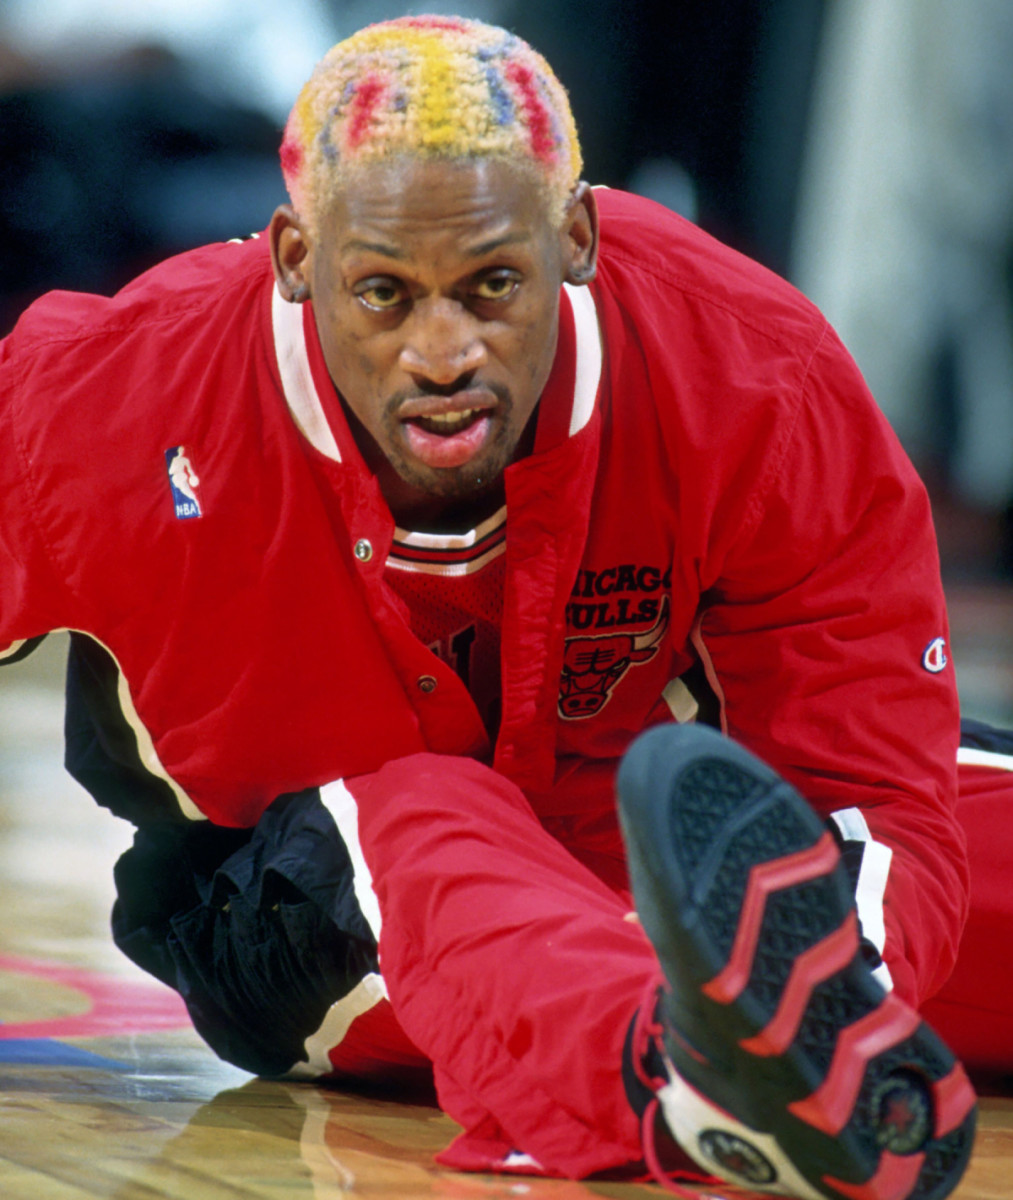 Dennis Rodman Revealed He Would Go To Party In Las Vegas 20-25 Times During The NBA Season: "We Had A Plane, I'd Just Go To Vegas And Come Back The Next Night."